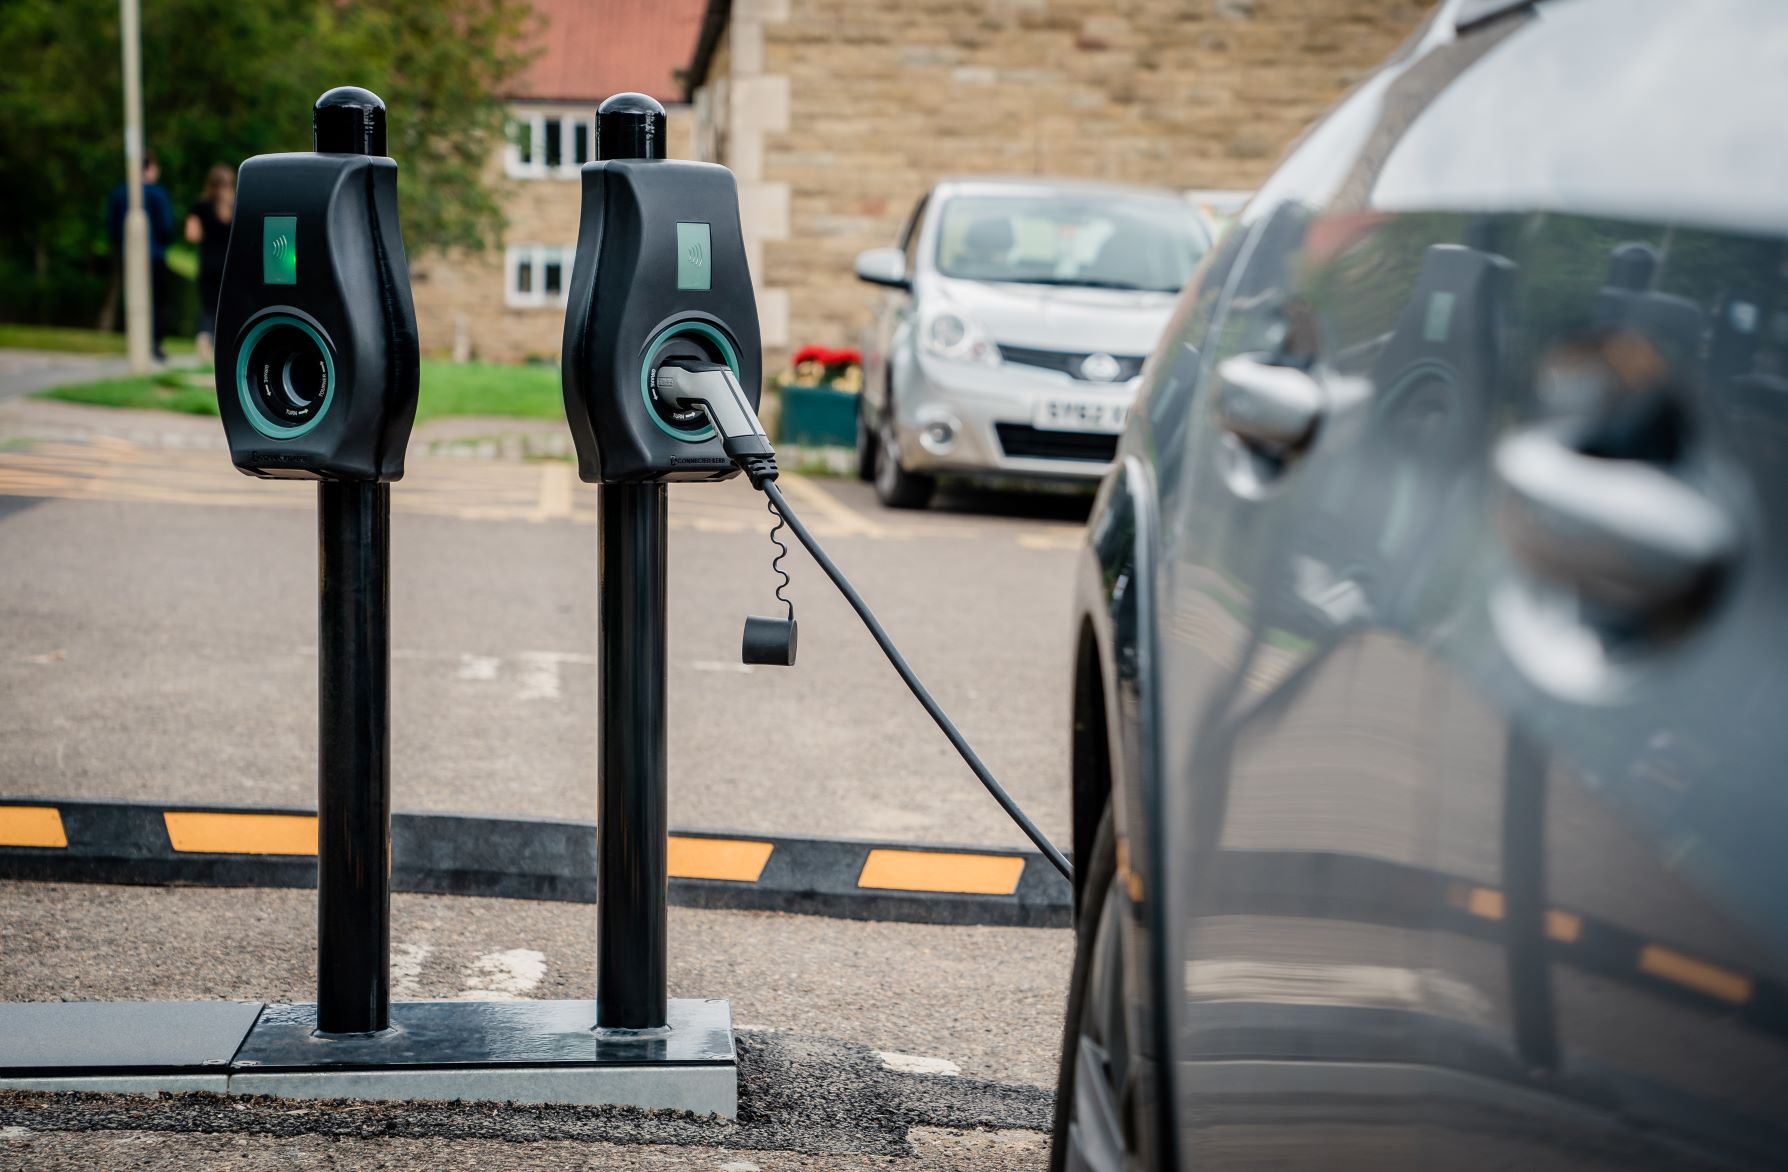 Connected Kerb Charging Station Yorkshire 08000 291696